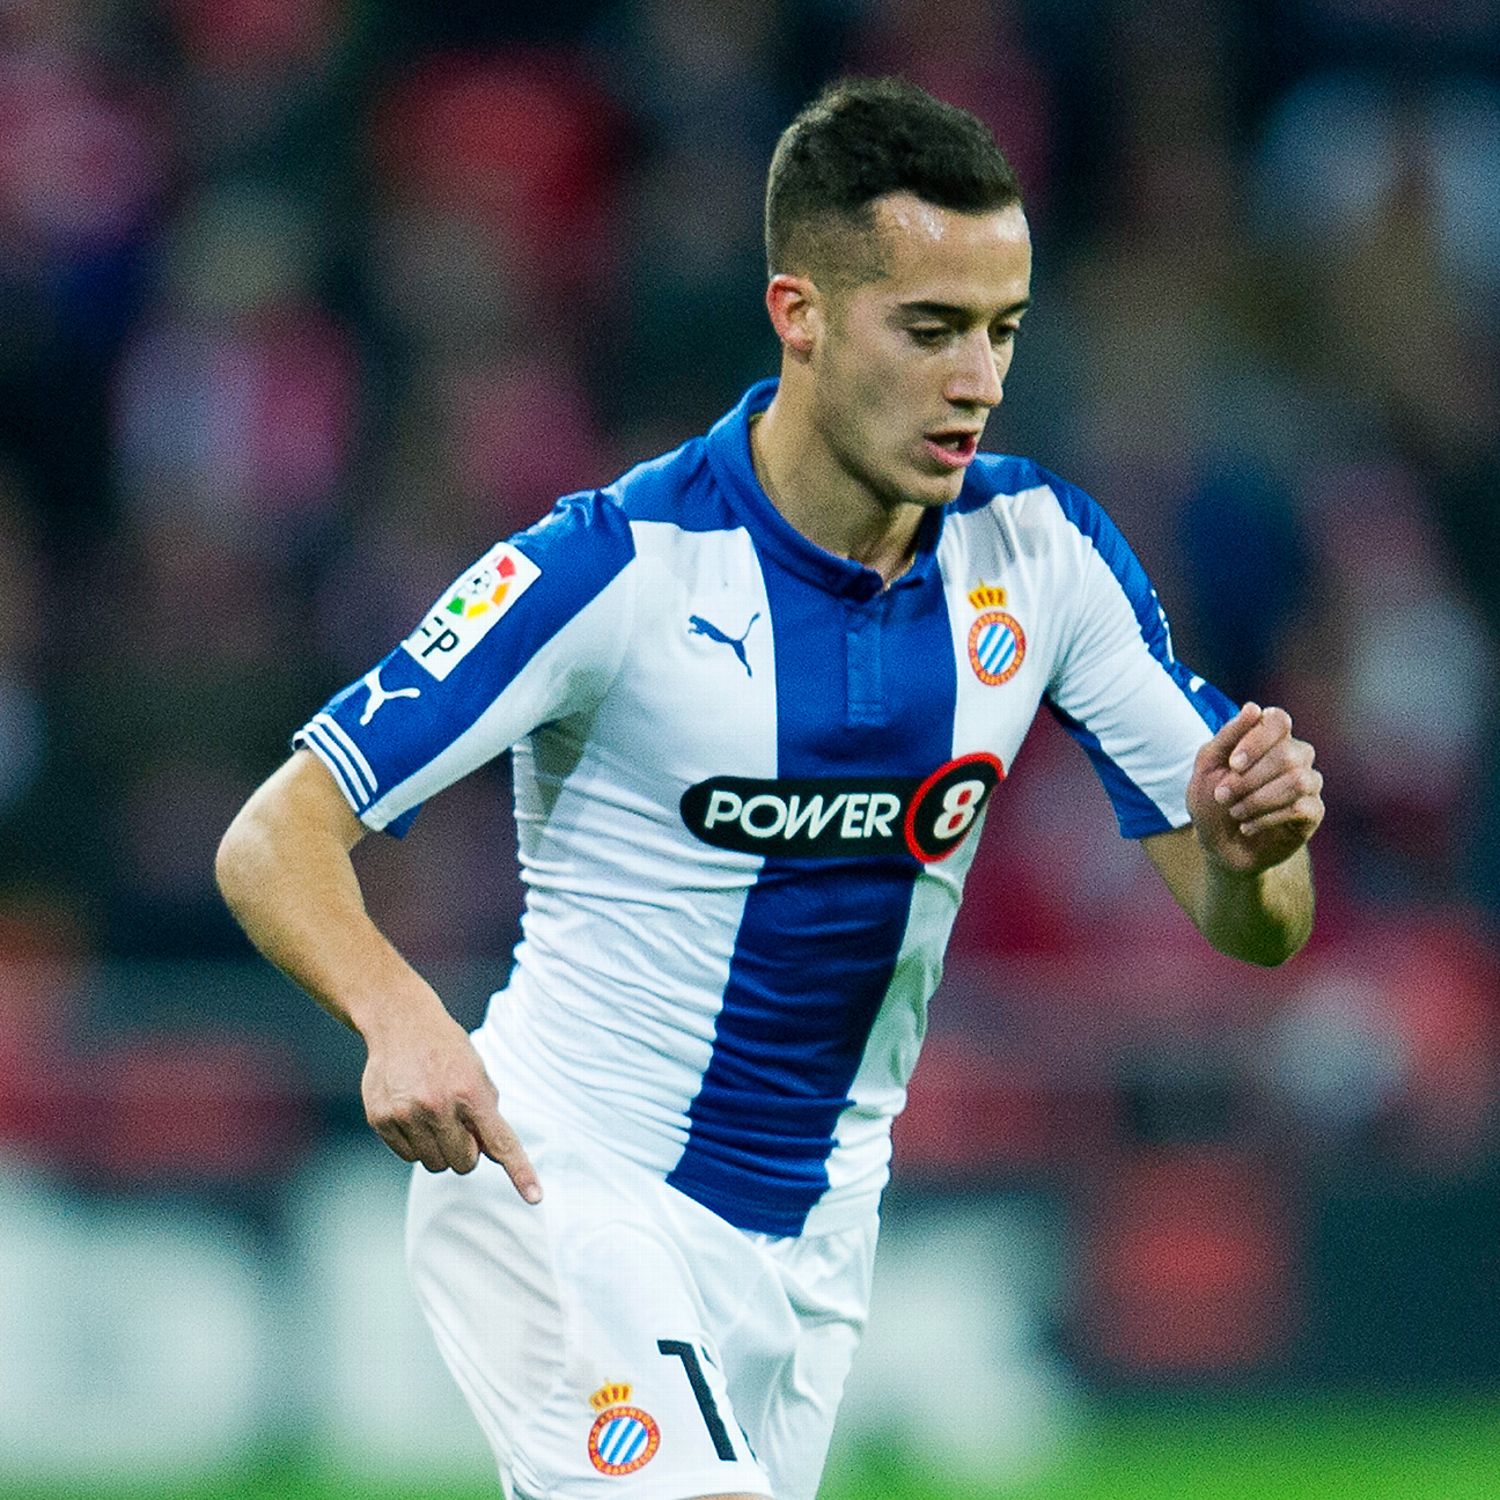 Five things to know about Real Madrid's Lucas Vazquez - ESPN FC